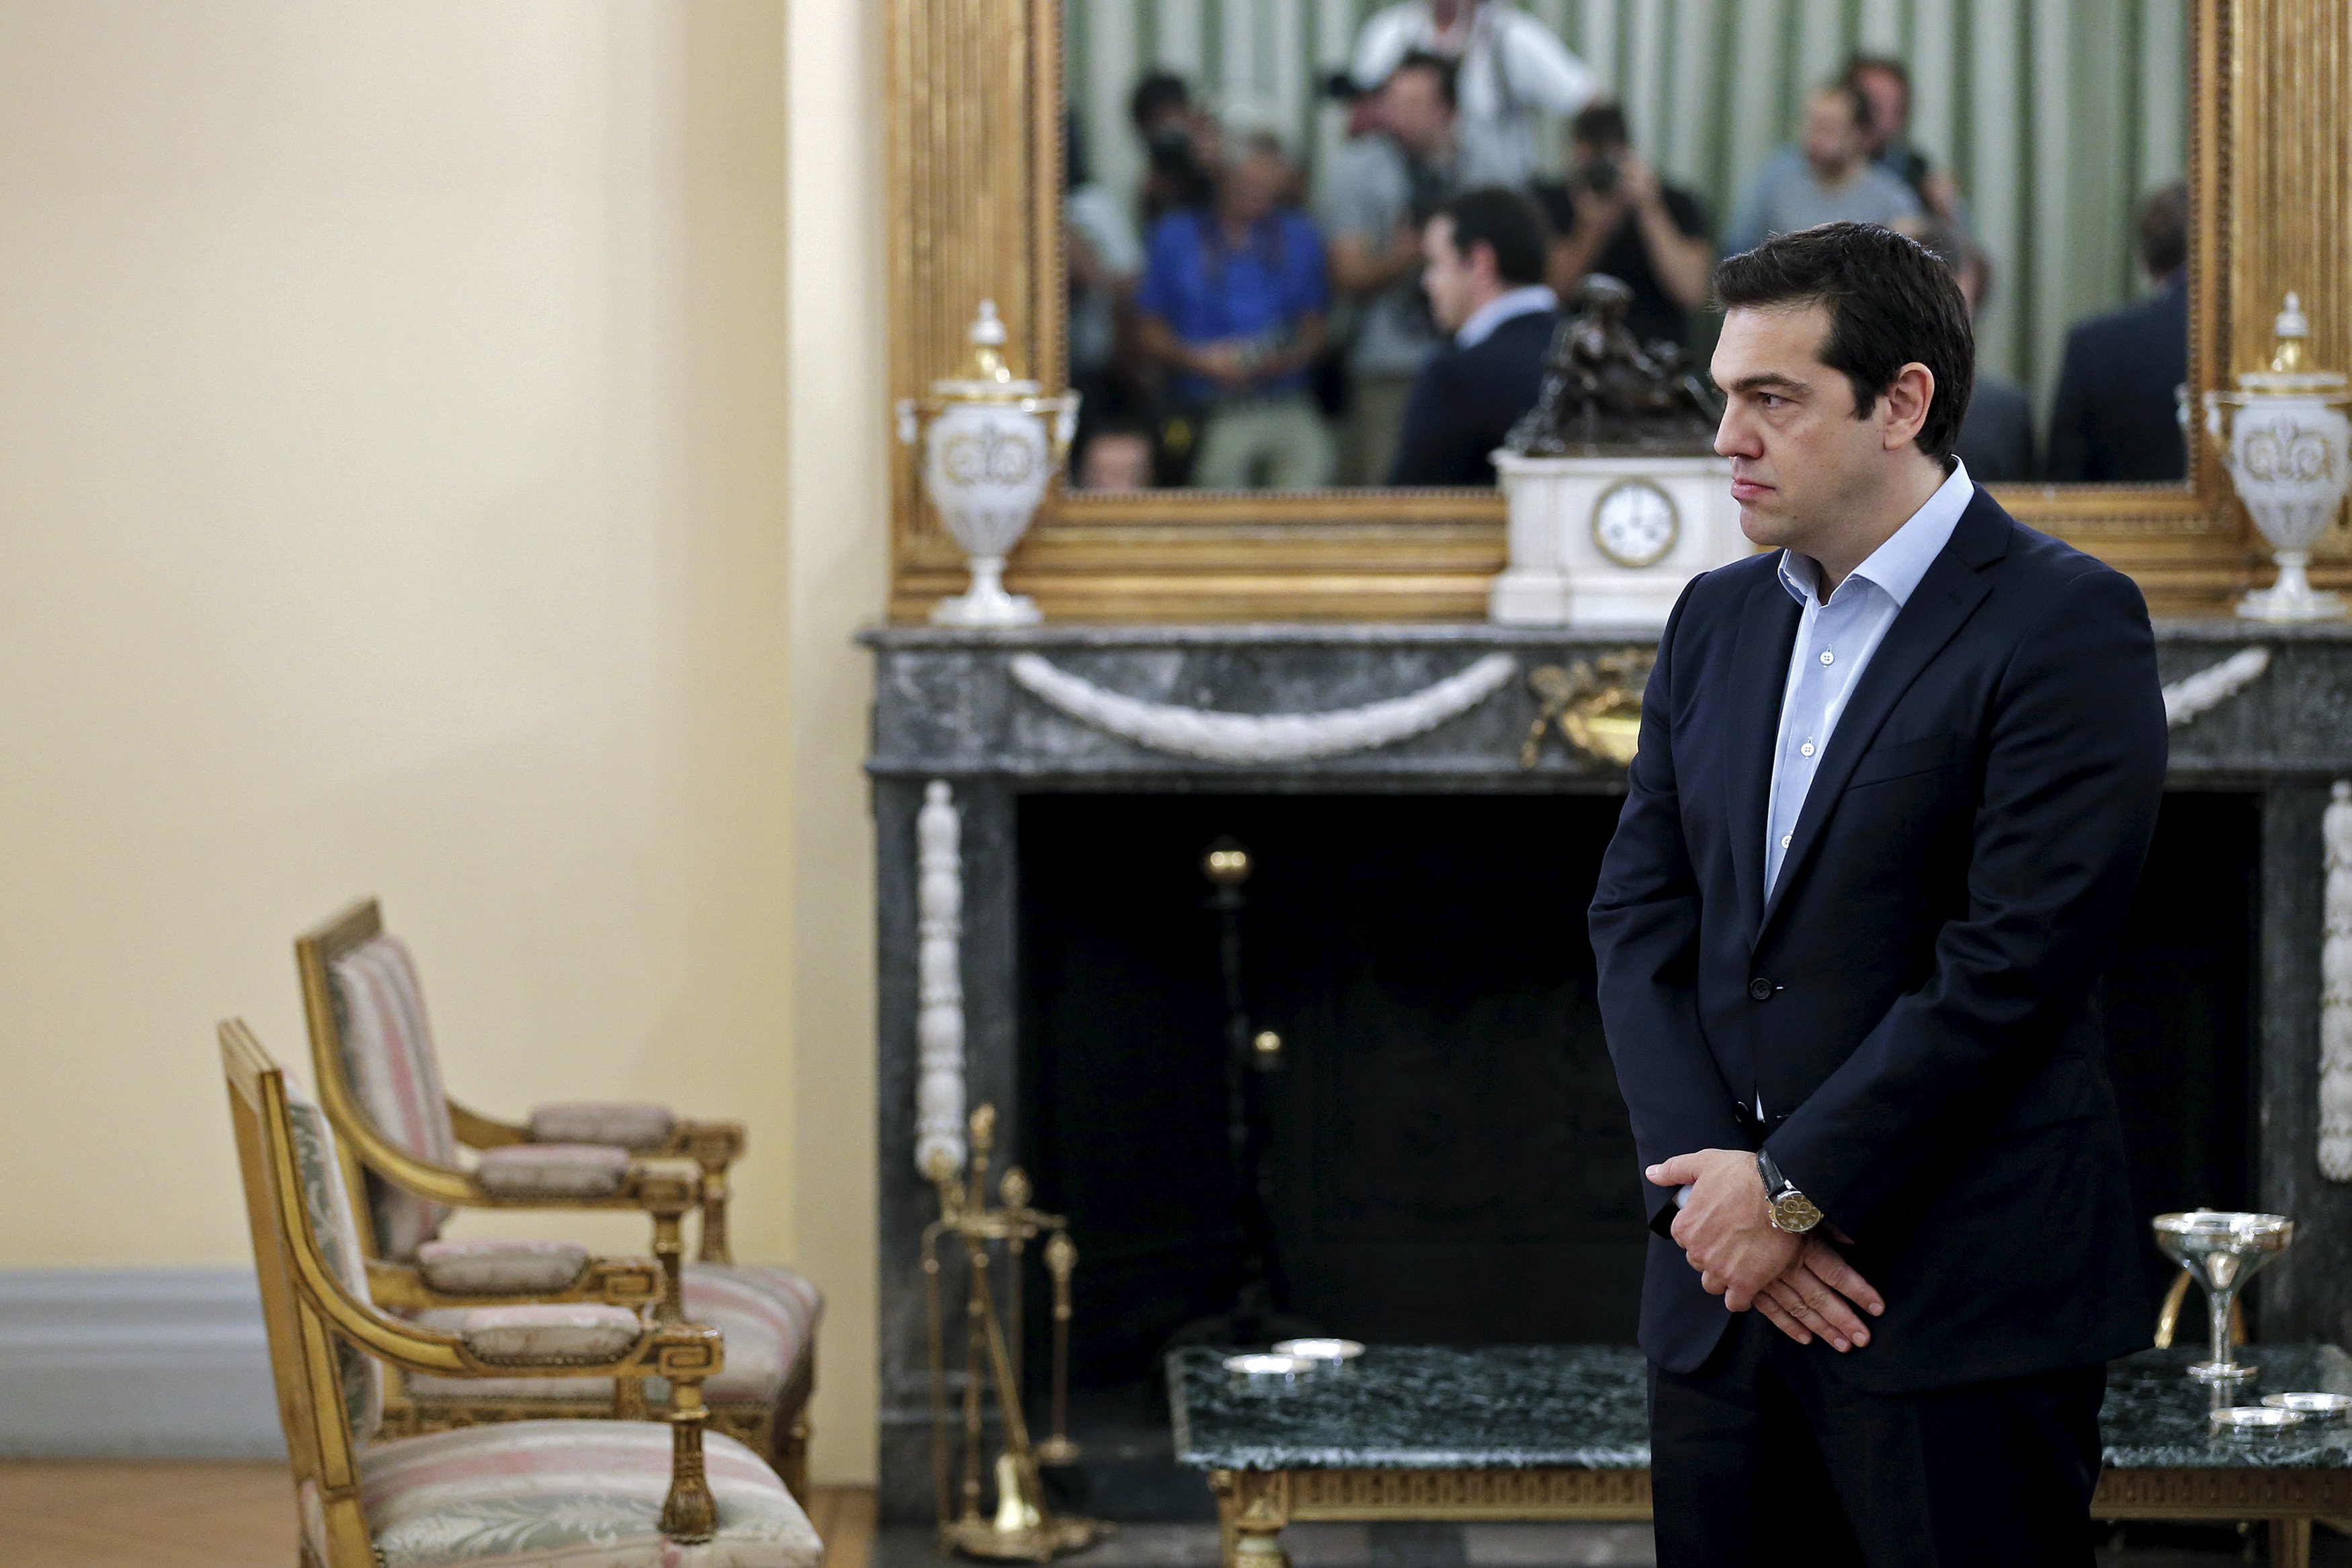 Tsipras' new government was sworn in on Saturday after a reshuffle expelled dissidents from his cabinet and began a new phase of negotiations for a third bailout package.